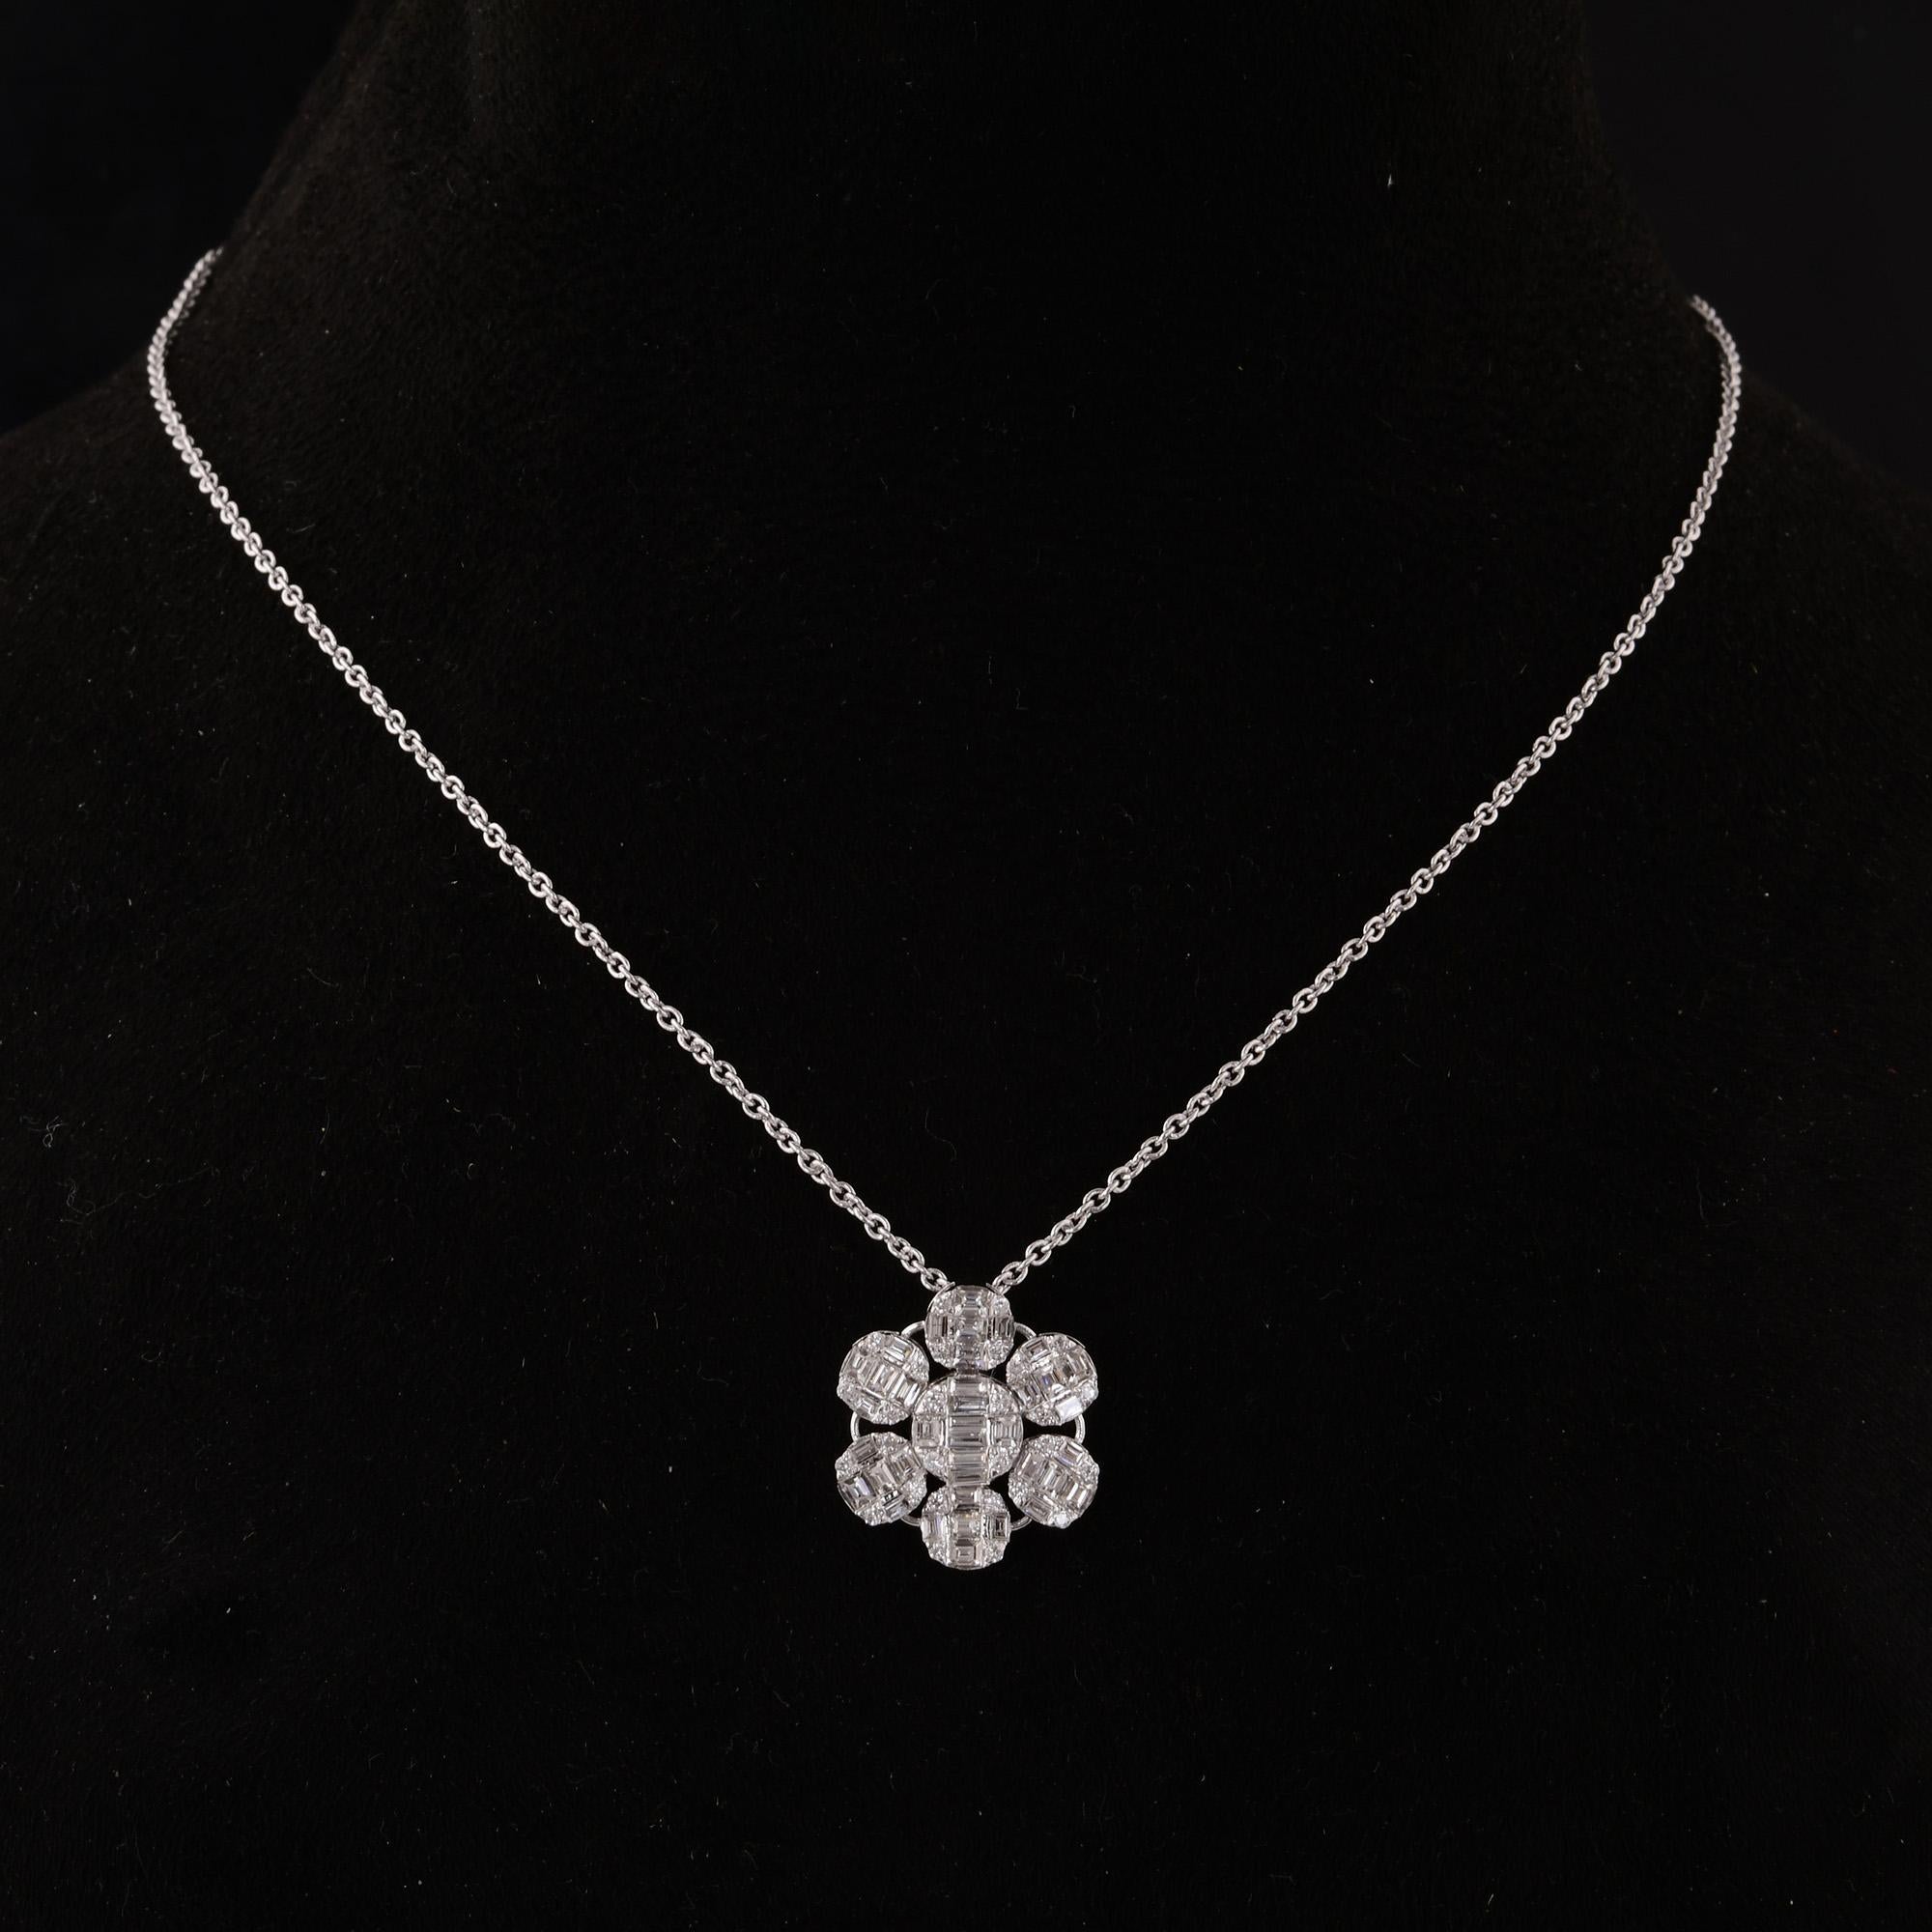 This exquisite pendant necklace features a stunning arrangement of baguette diamonds set in 14 karat white gold, creating a captivating flower design. Each diamond is meticulously selected for its quality, boasting SI clarity and HI color, ensuring